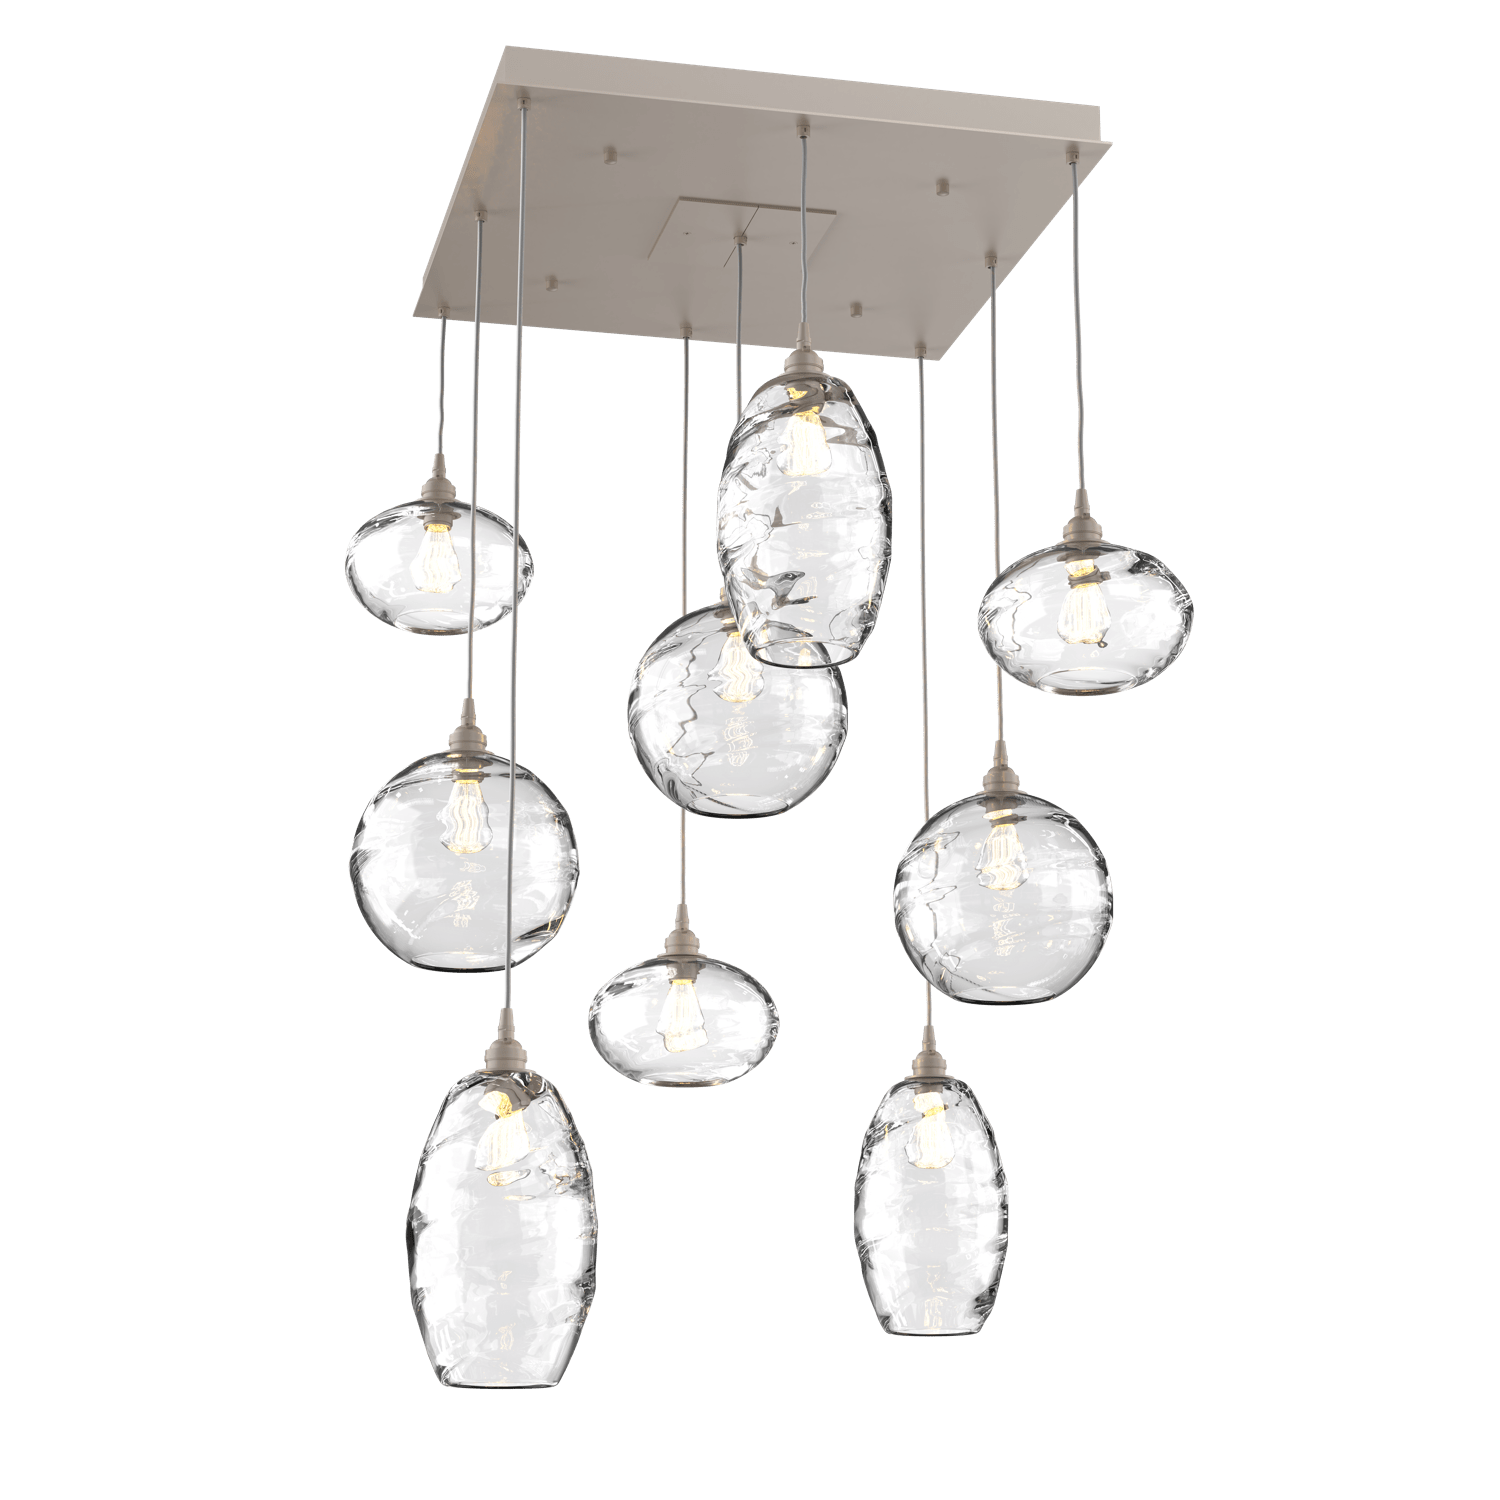 CHB0048-09-BS-OC-Hammerton-Studio-Optic-Blown-Glass-Misto-9-light-square-pendant-chandelier-with-metallic-beige-silver-finish-and-optic-clear-blown-glass-shades-and-incandescent-lamping